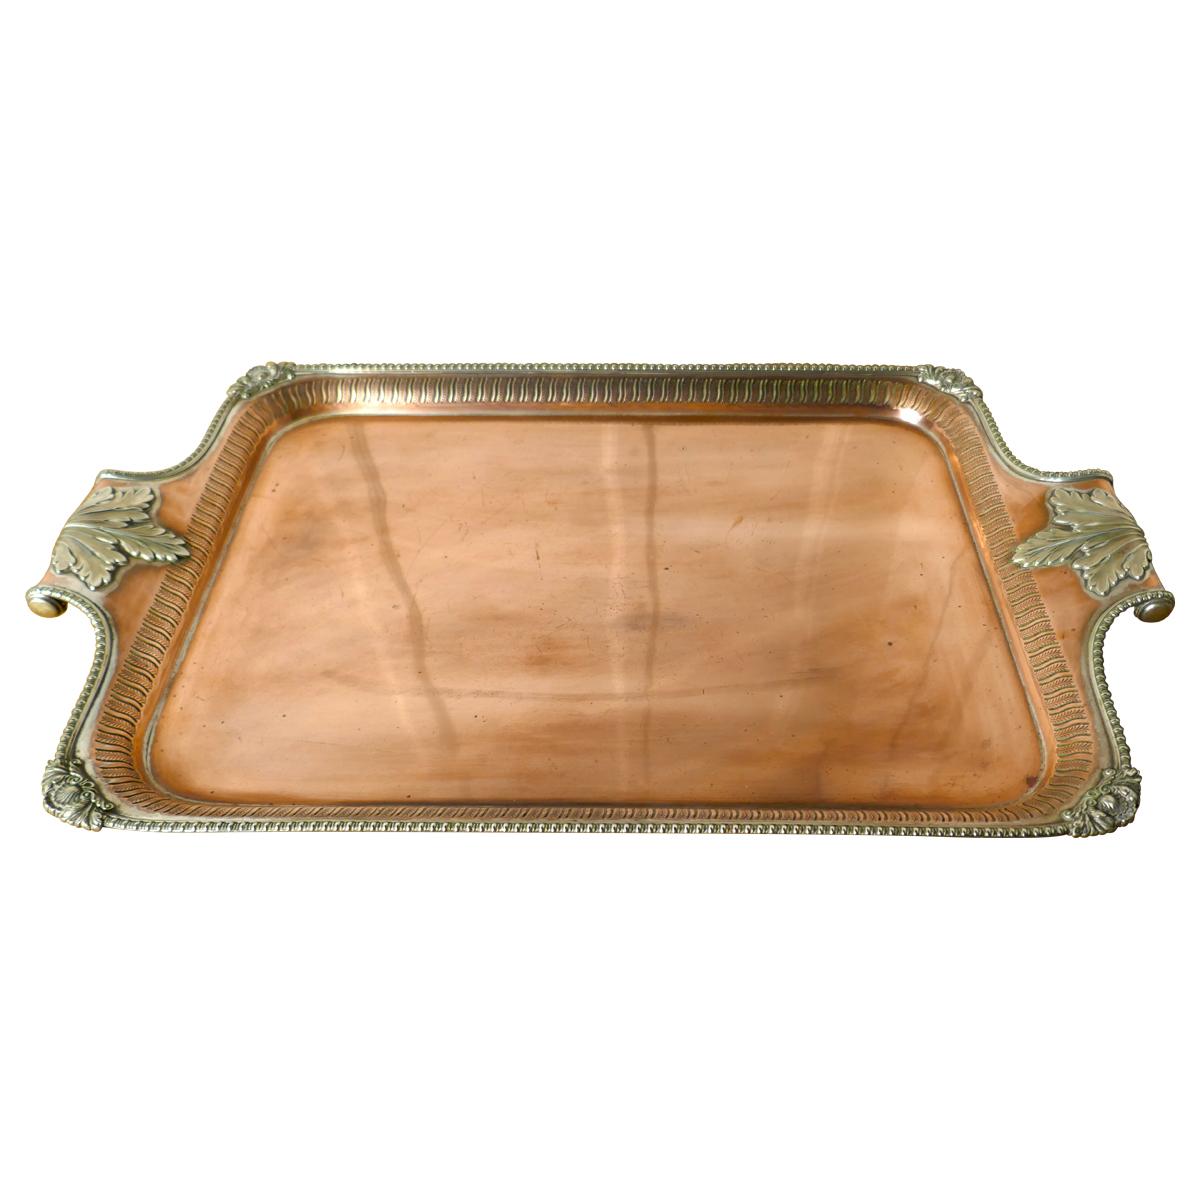 Large 19th Century Silver Plated Tray with Pierced Gallery